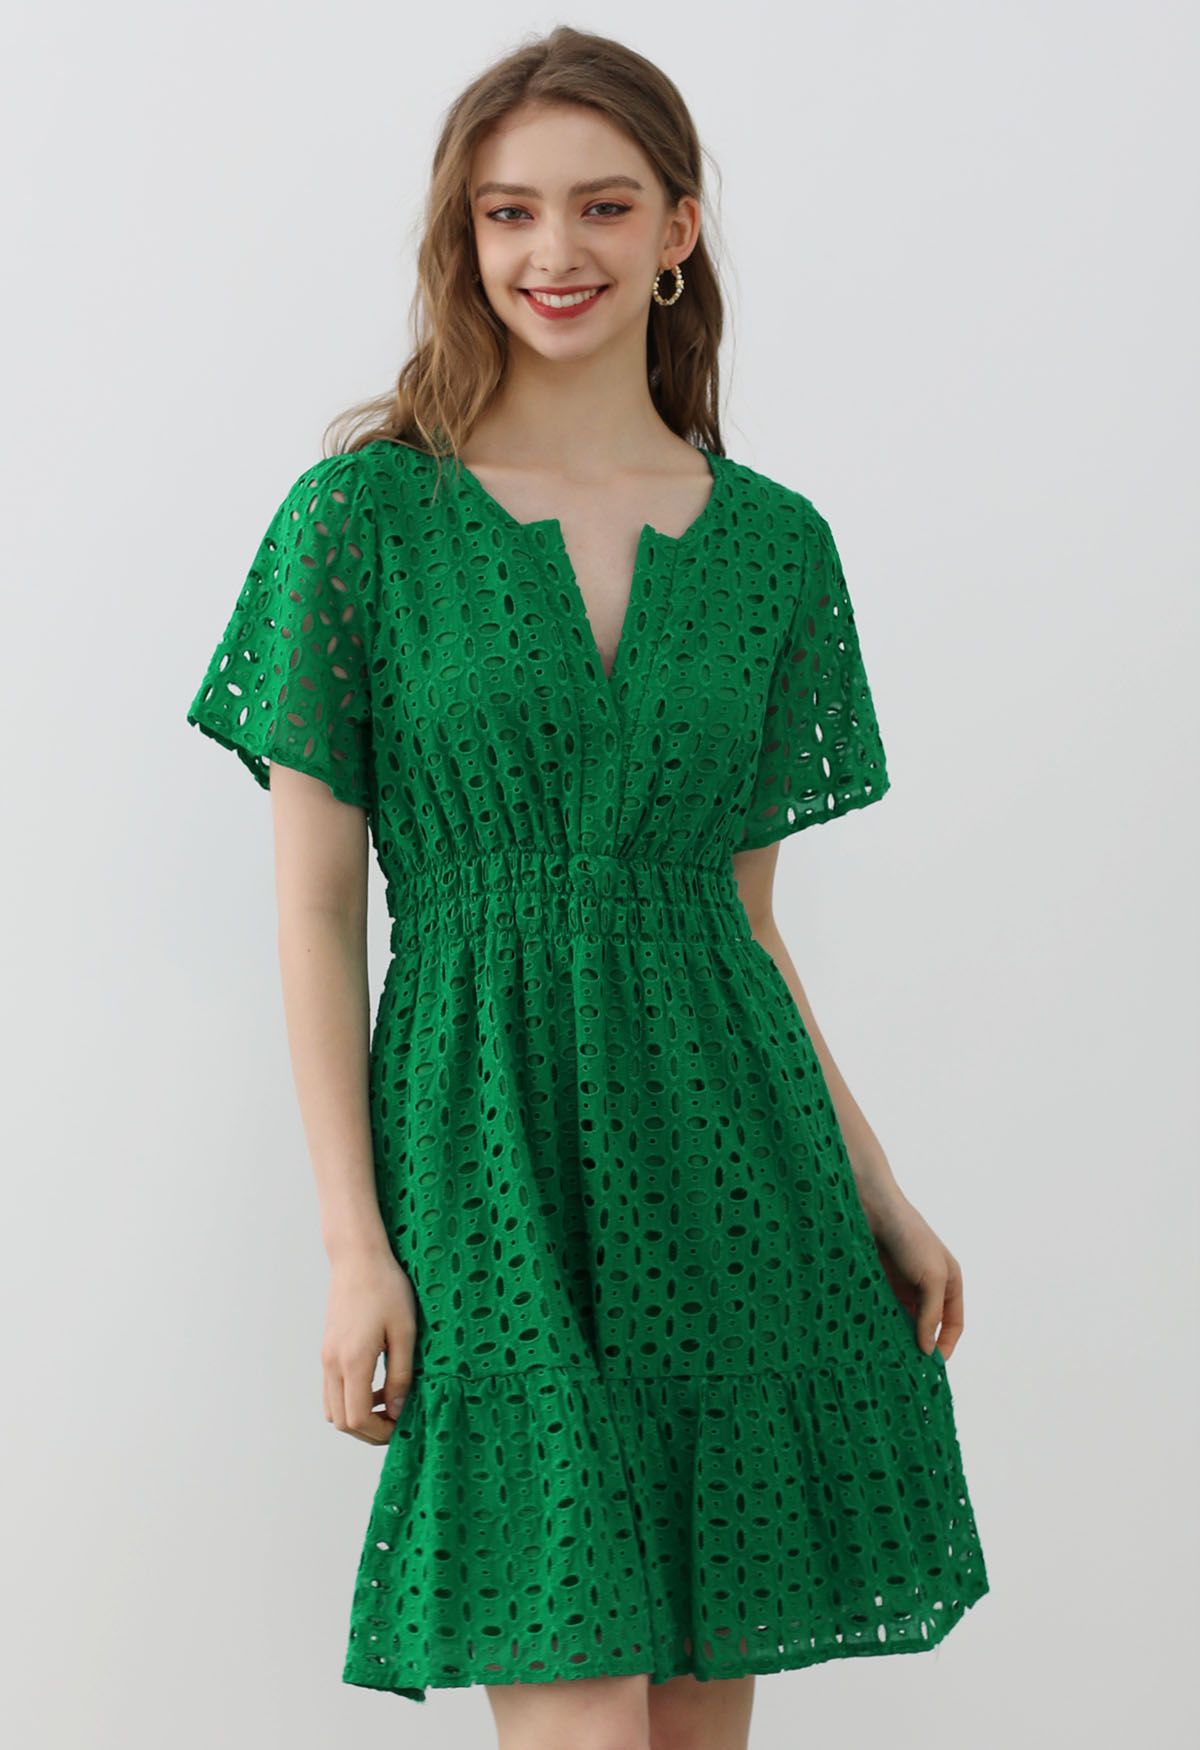 Eyelet Embroidery V-Neck Cotton Dress in Green